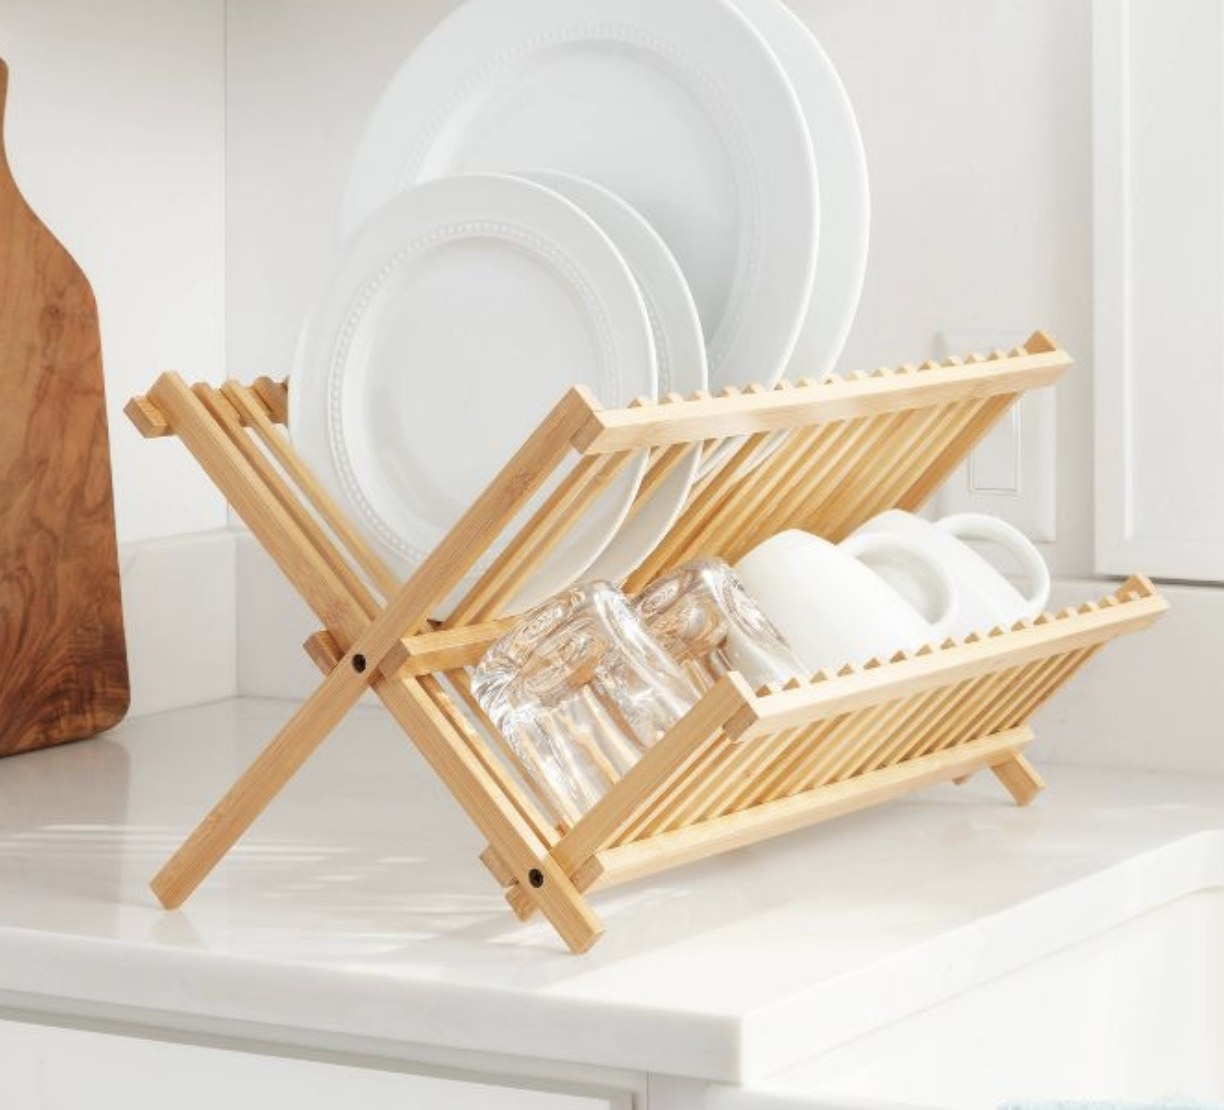 A bamboo drying rack holding white dishes and glasses